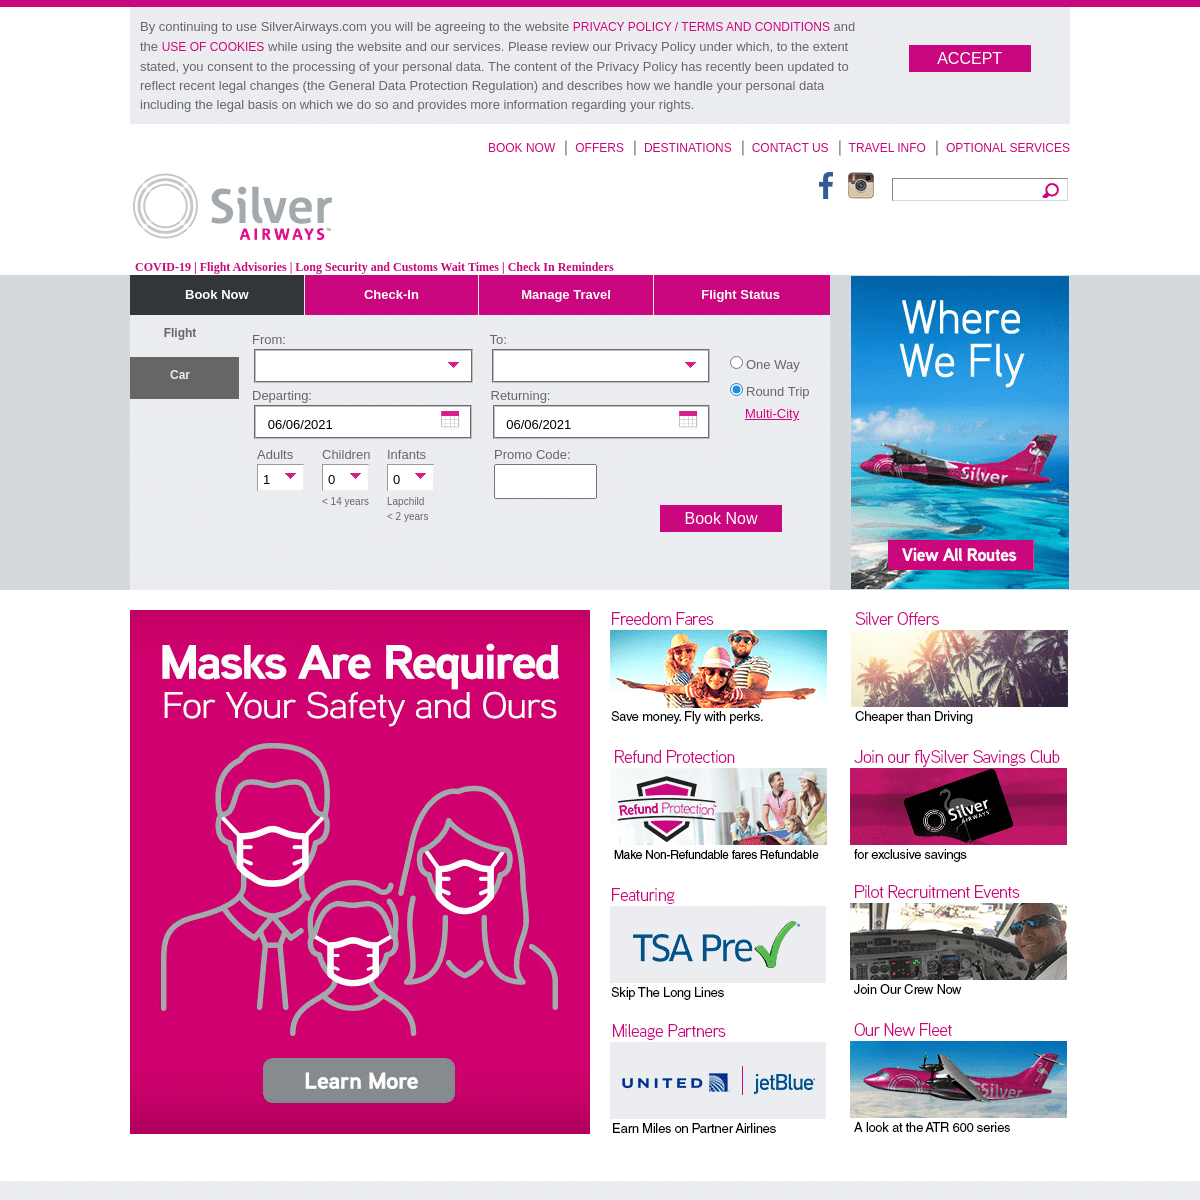 A complete backup of https://silverairways.com